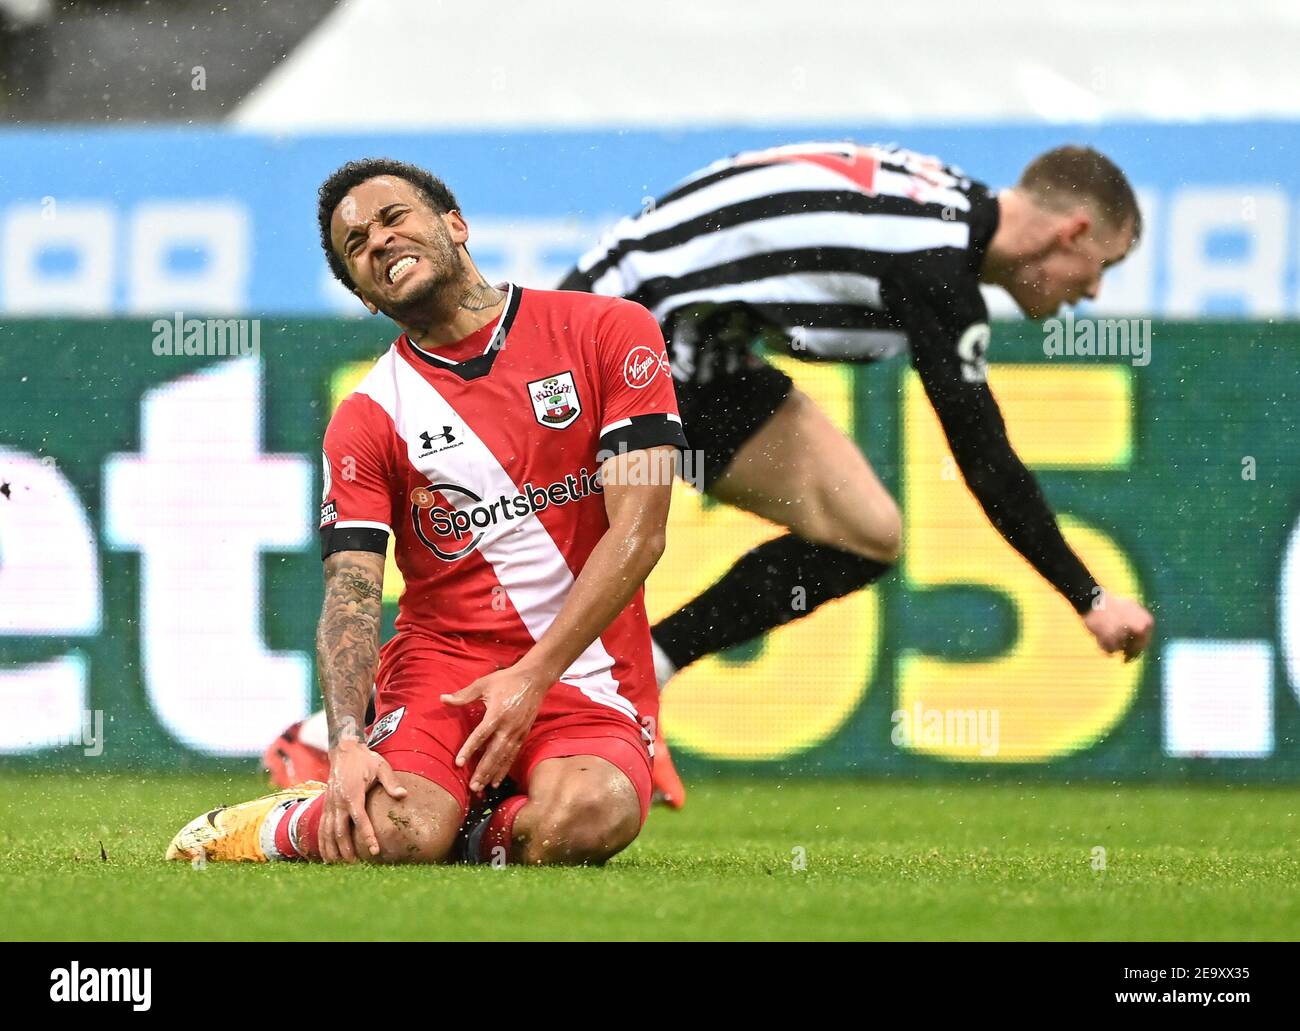 Southampton's Ryan Bertrand (left) is fouled by Newcastle United's Emil Krafth during the Premier League match at St James' Park, Newcastle upon Tyne. Picture date: Saturday February 6, 2021. Stock Photo